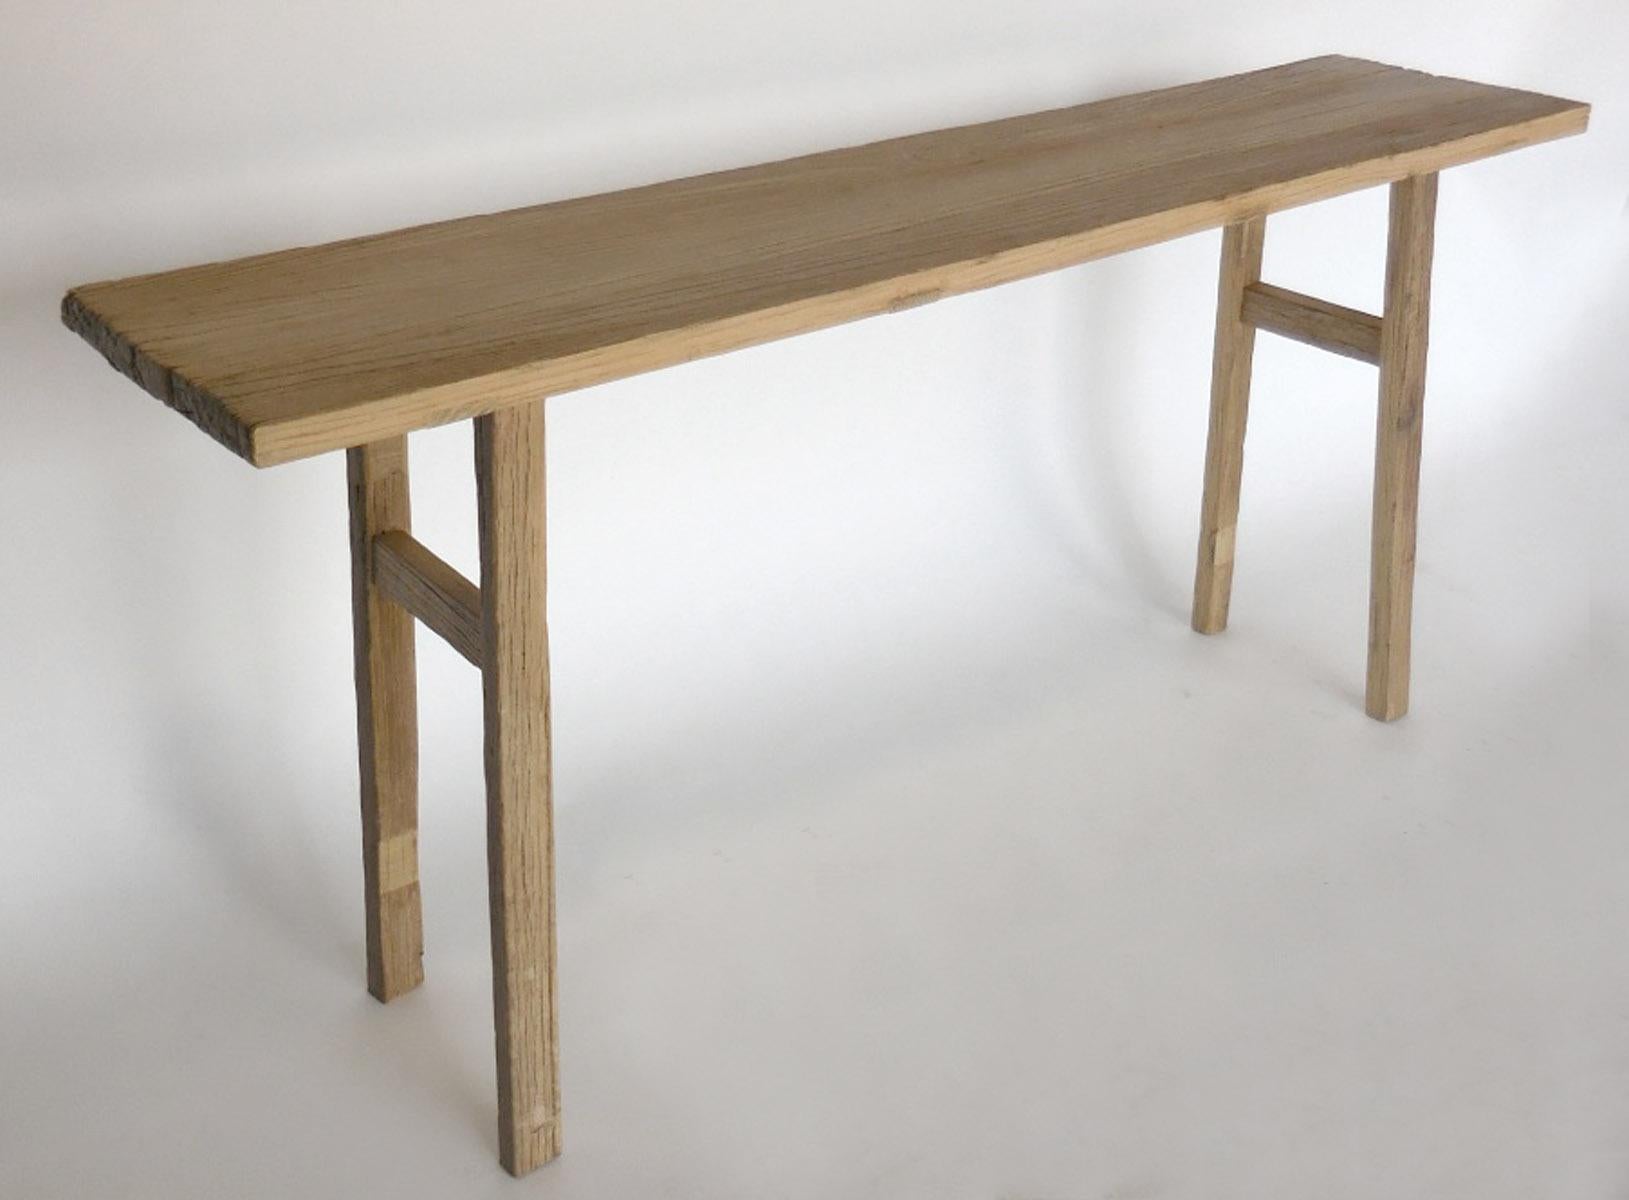 Naturally weathered two hundred year old Northern Elm from Japan fashioned into an airy low profile console table. Modern and rustic, made by Dos Gallos Studio. the patina is original, smooth and a grey beige.  